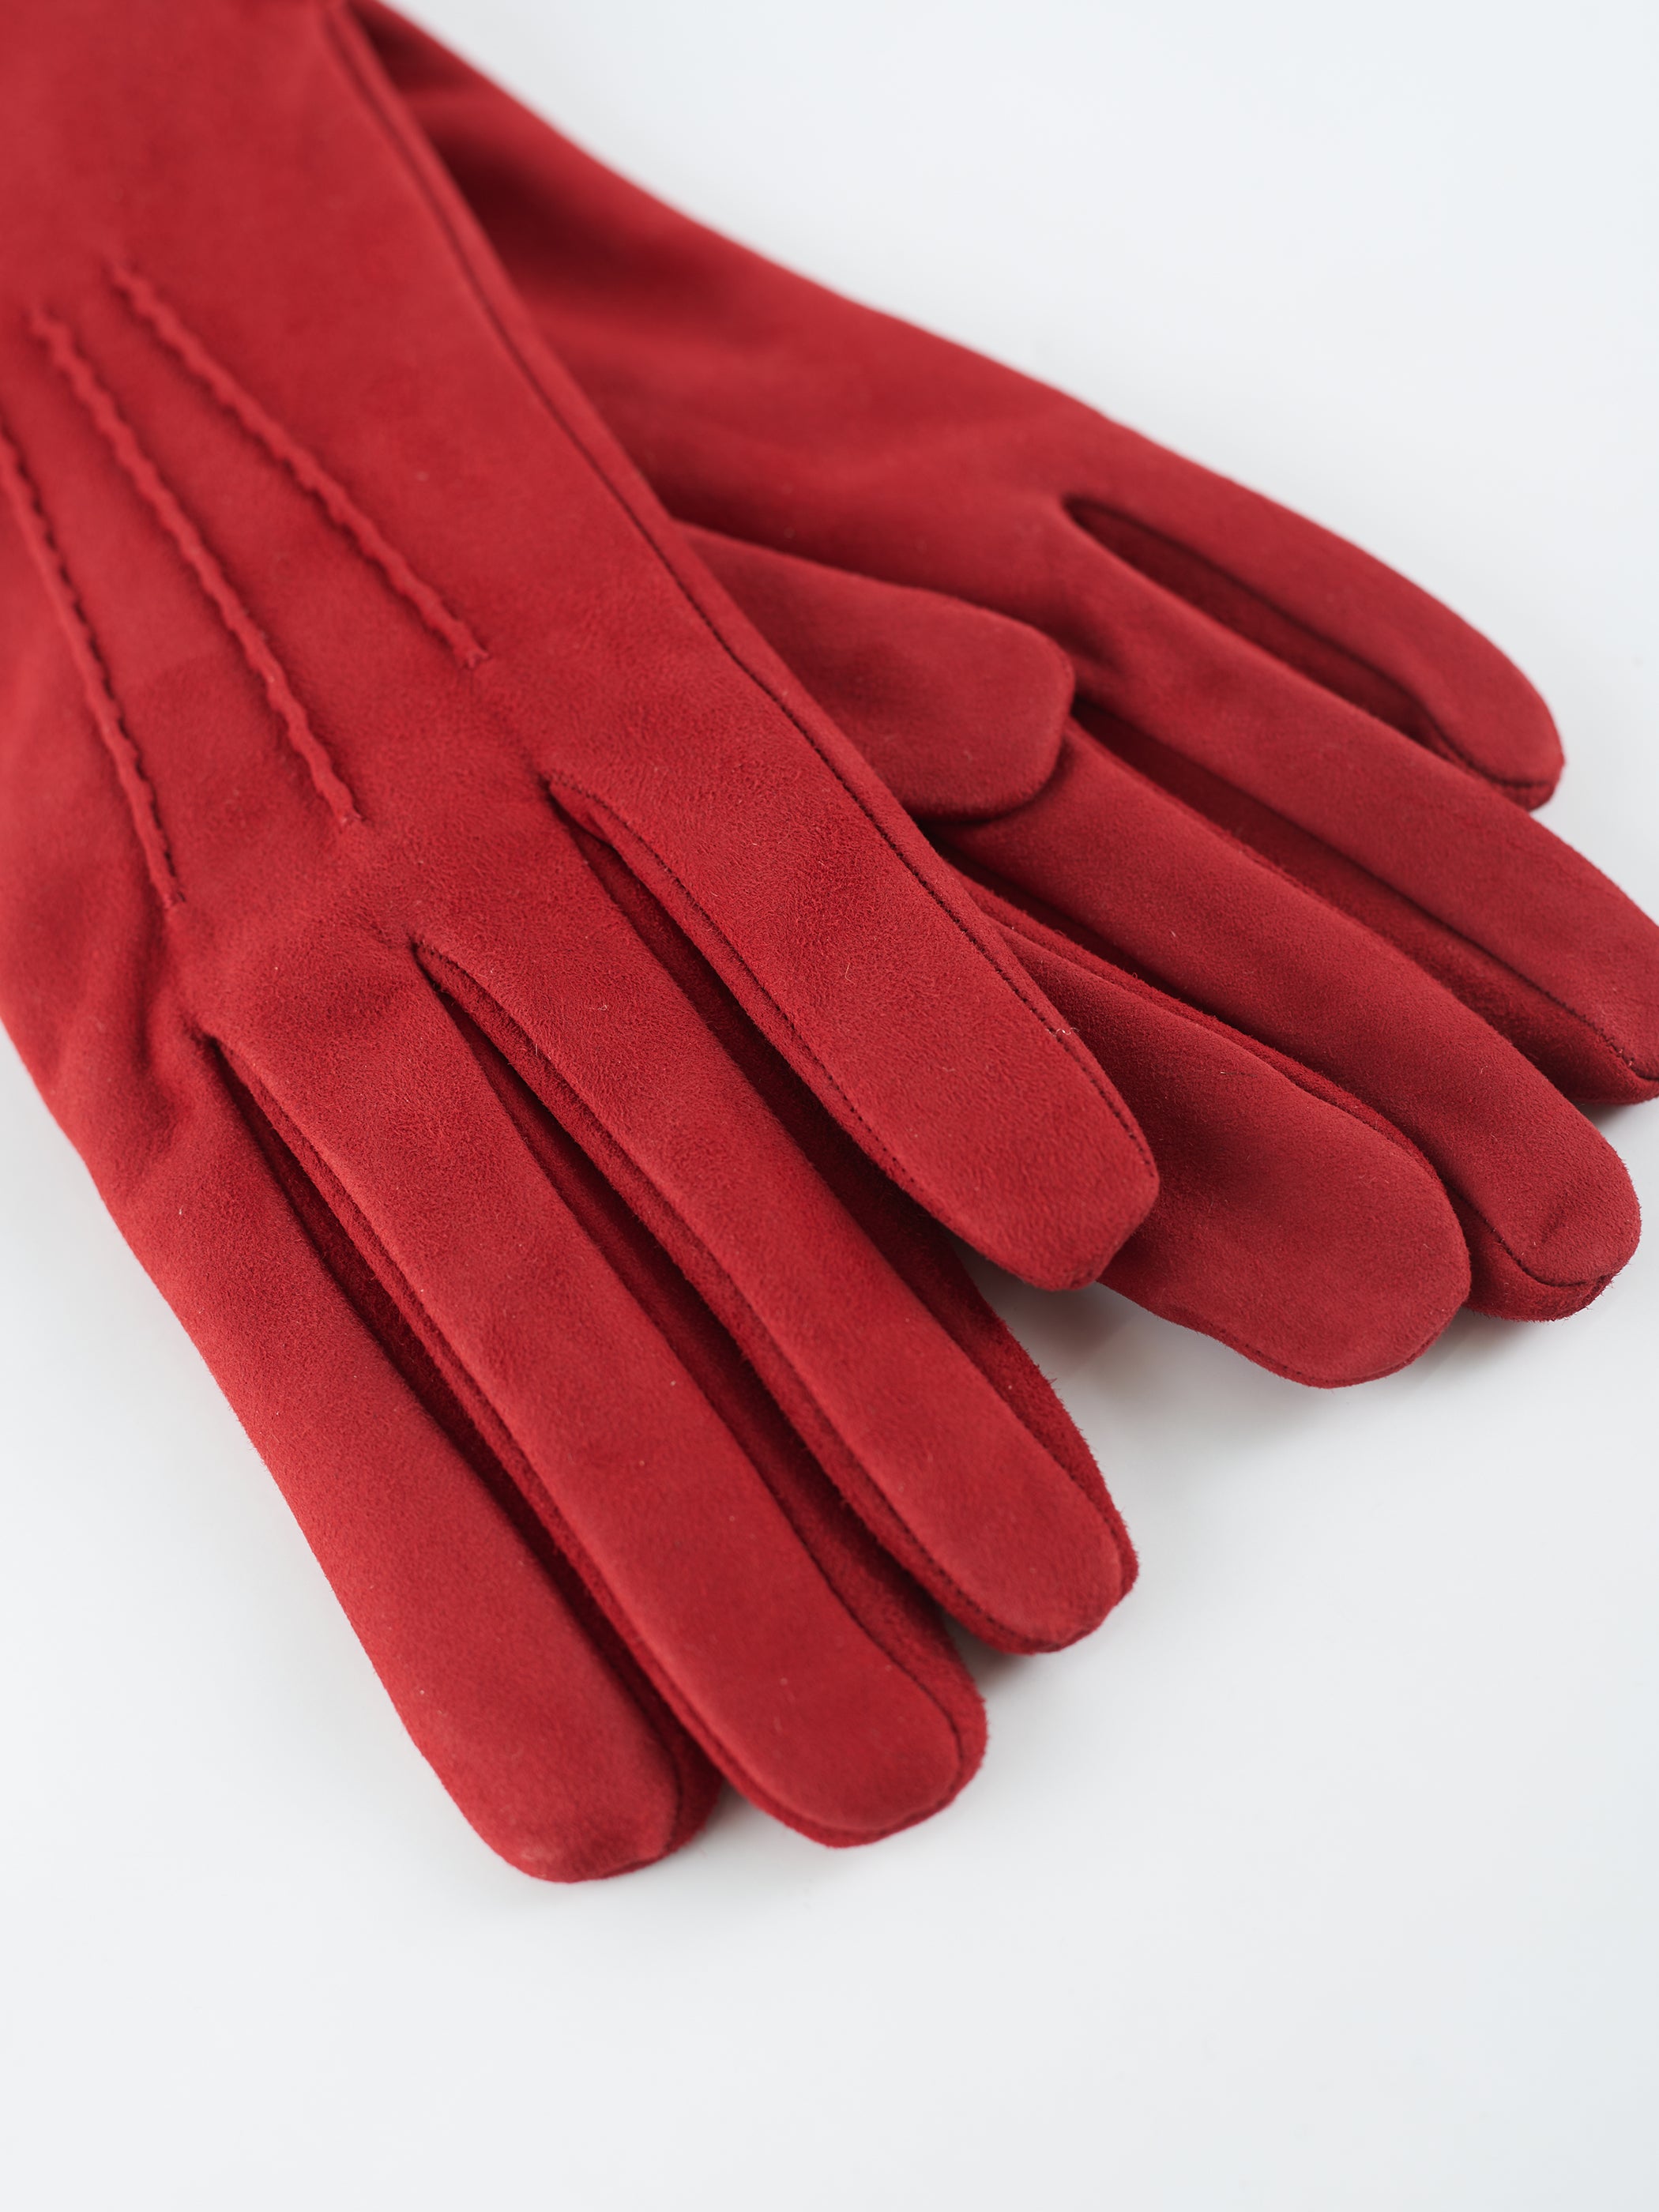 4220 Suede Glove Cashmere Lined